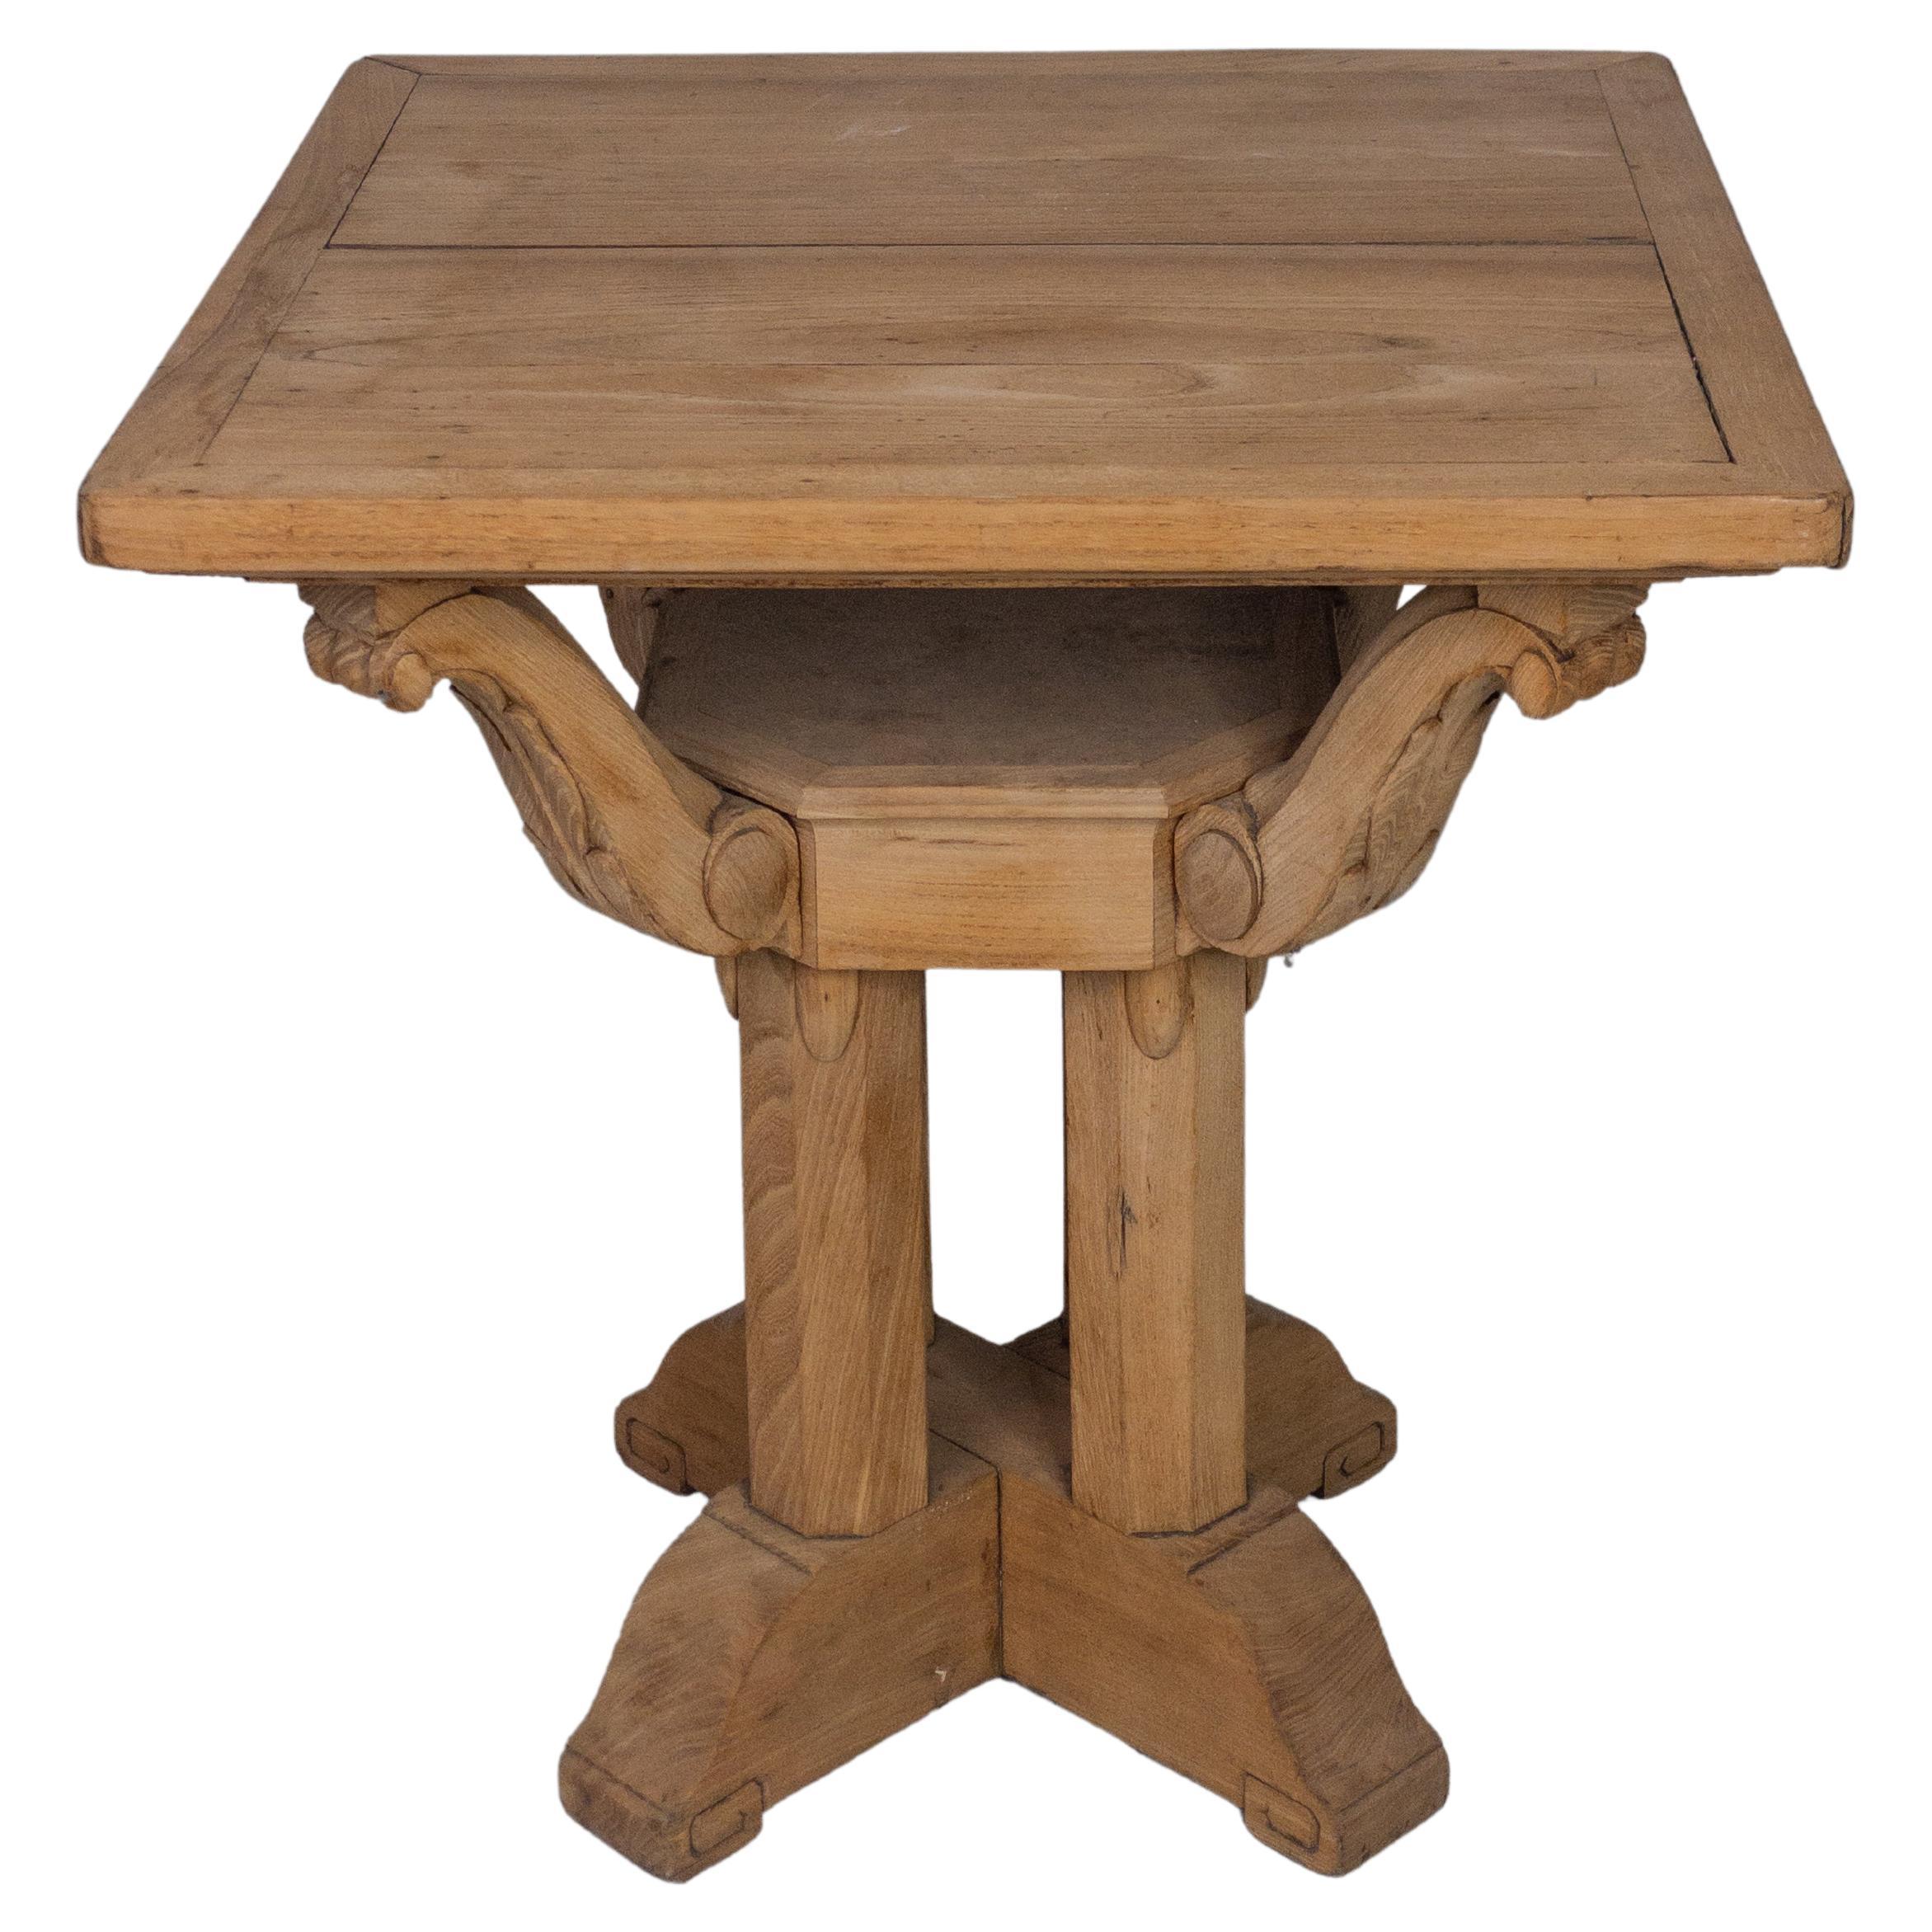 The 19th Century French Bleached Oak Table is an antique dining or occasional table originating from France during the 1800s. It is made of oak wood, which was a popular choice for furniture during that period due to its durability and attractive